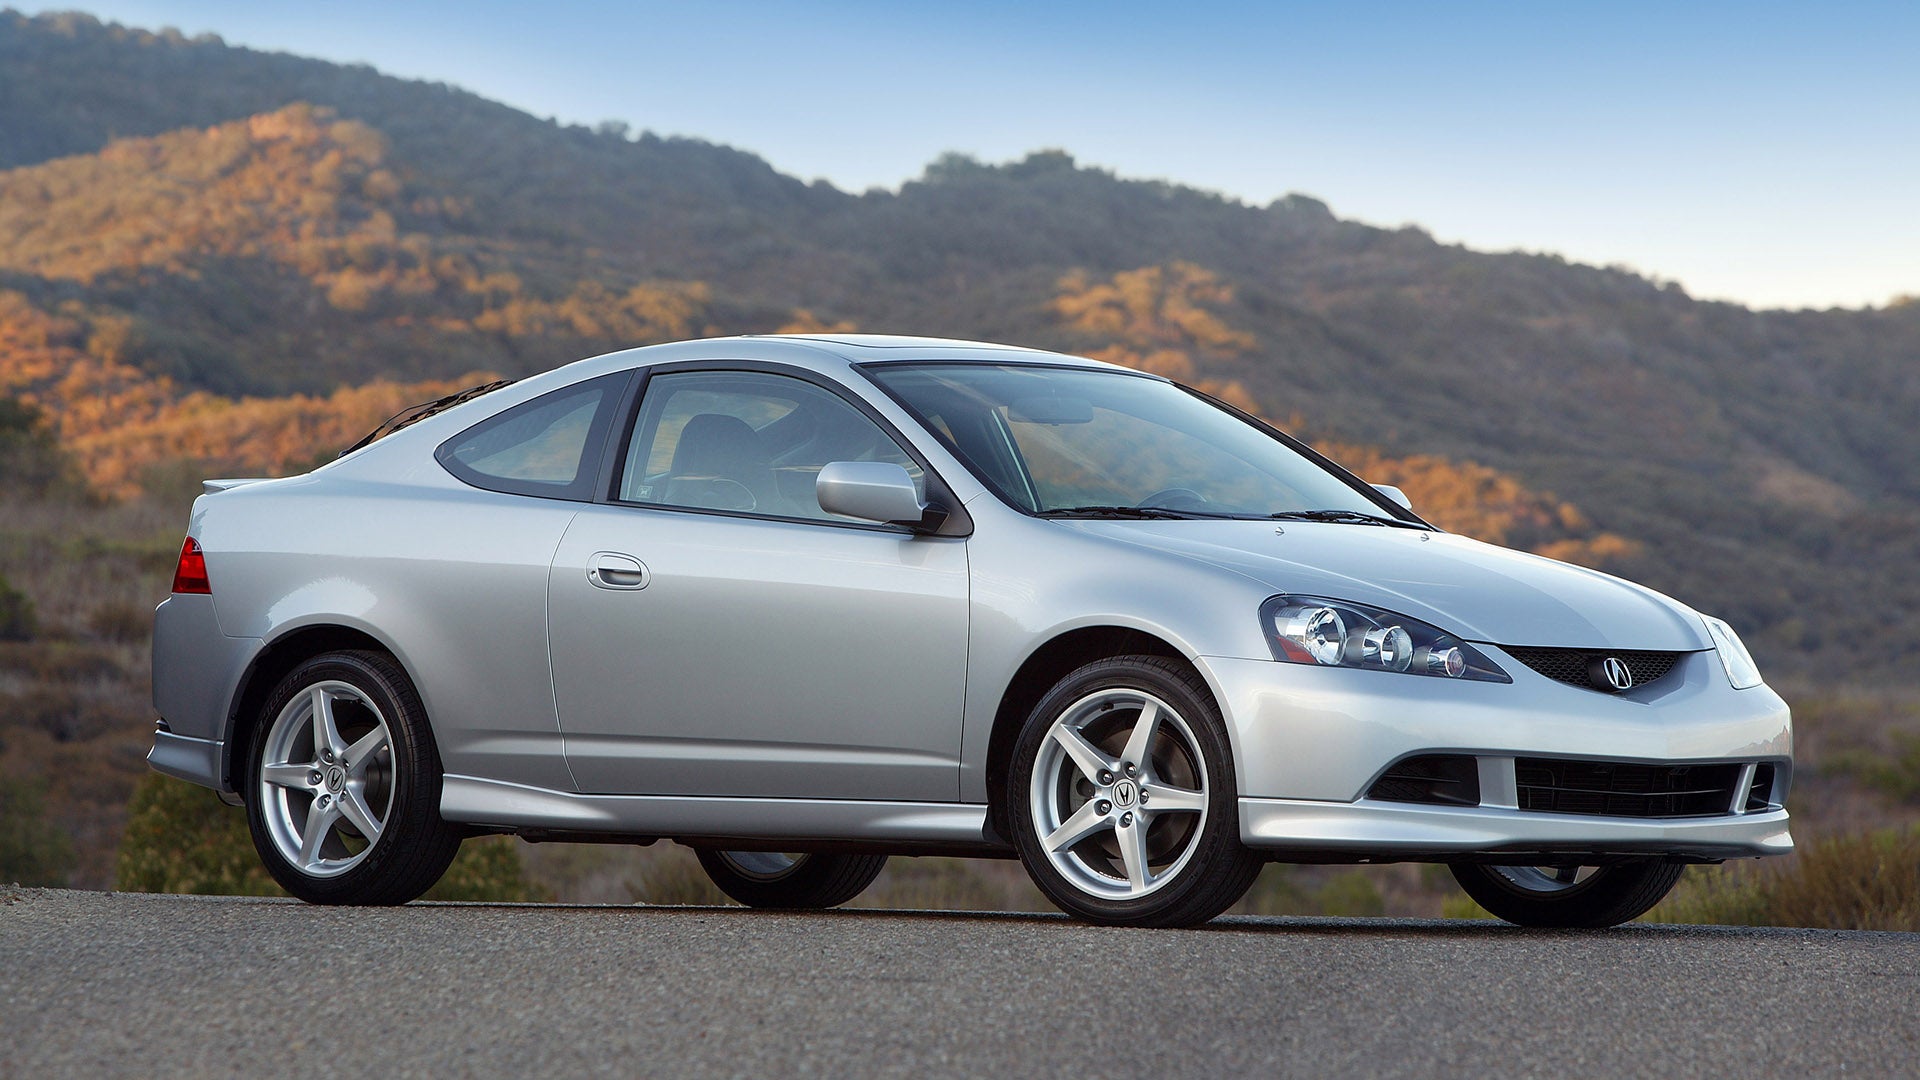 <p class="caption-title">2005-2006 Acura RSX Type S</p>, The Acura RSX Type S debuted for 2002 and received a refresh for 2005., <i>Acura</i>